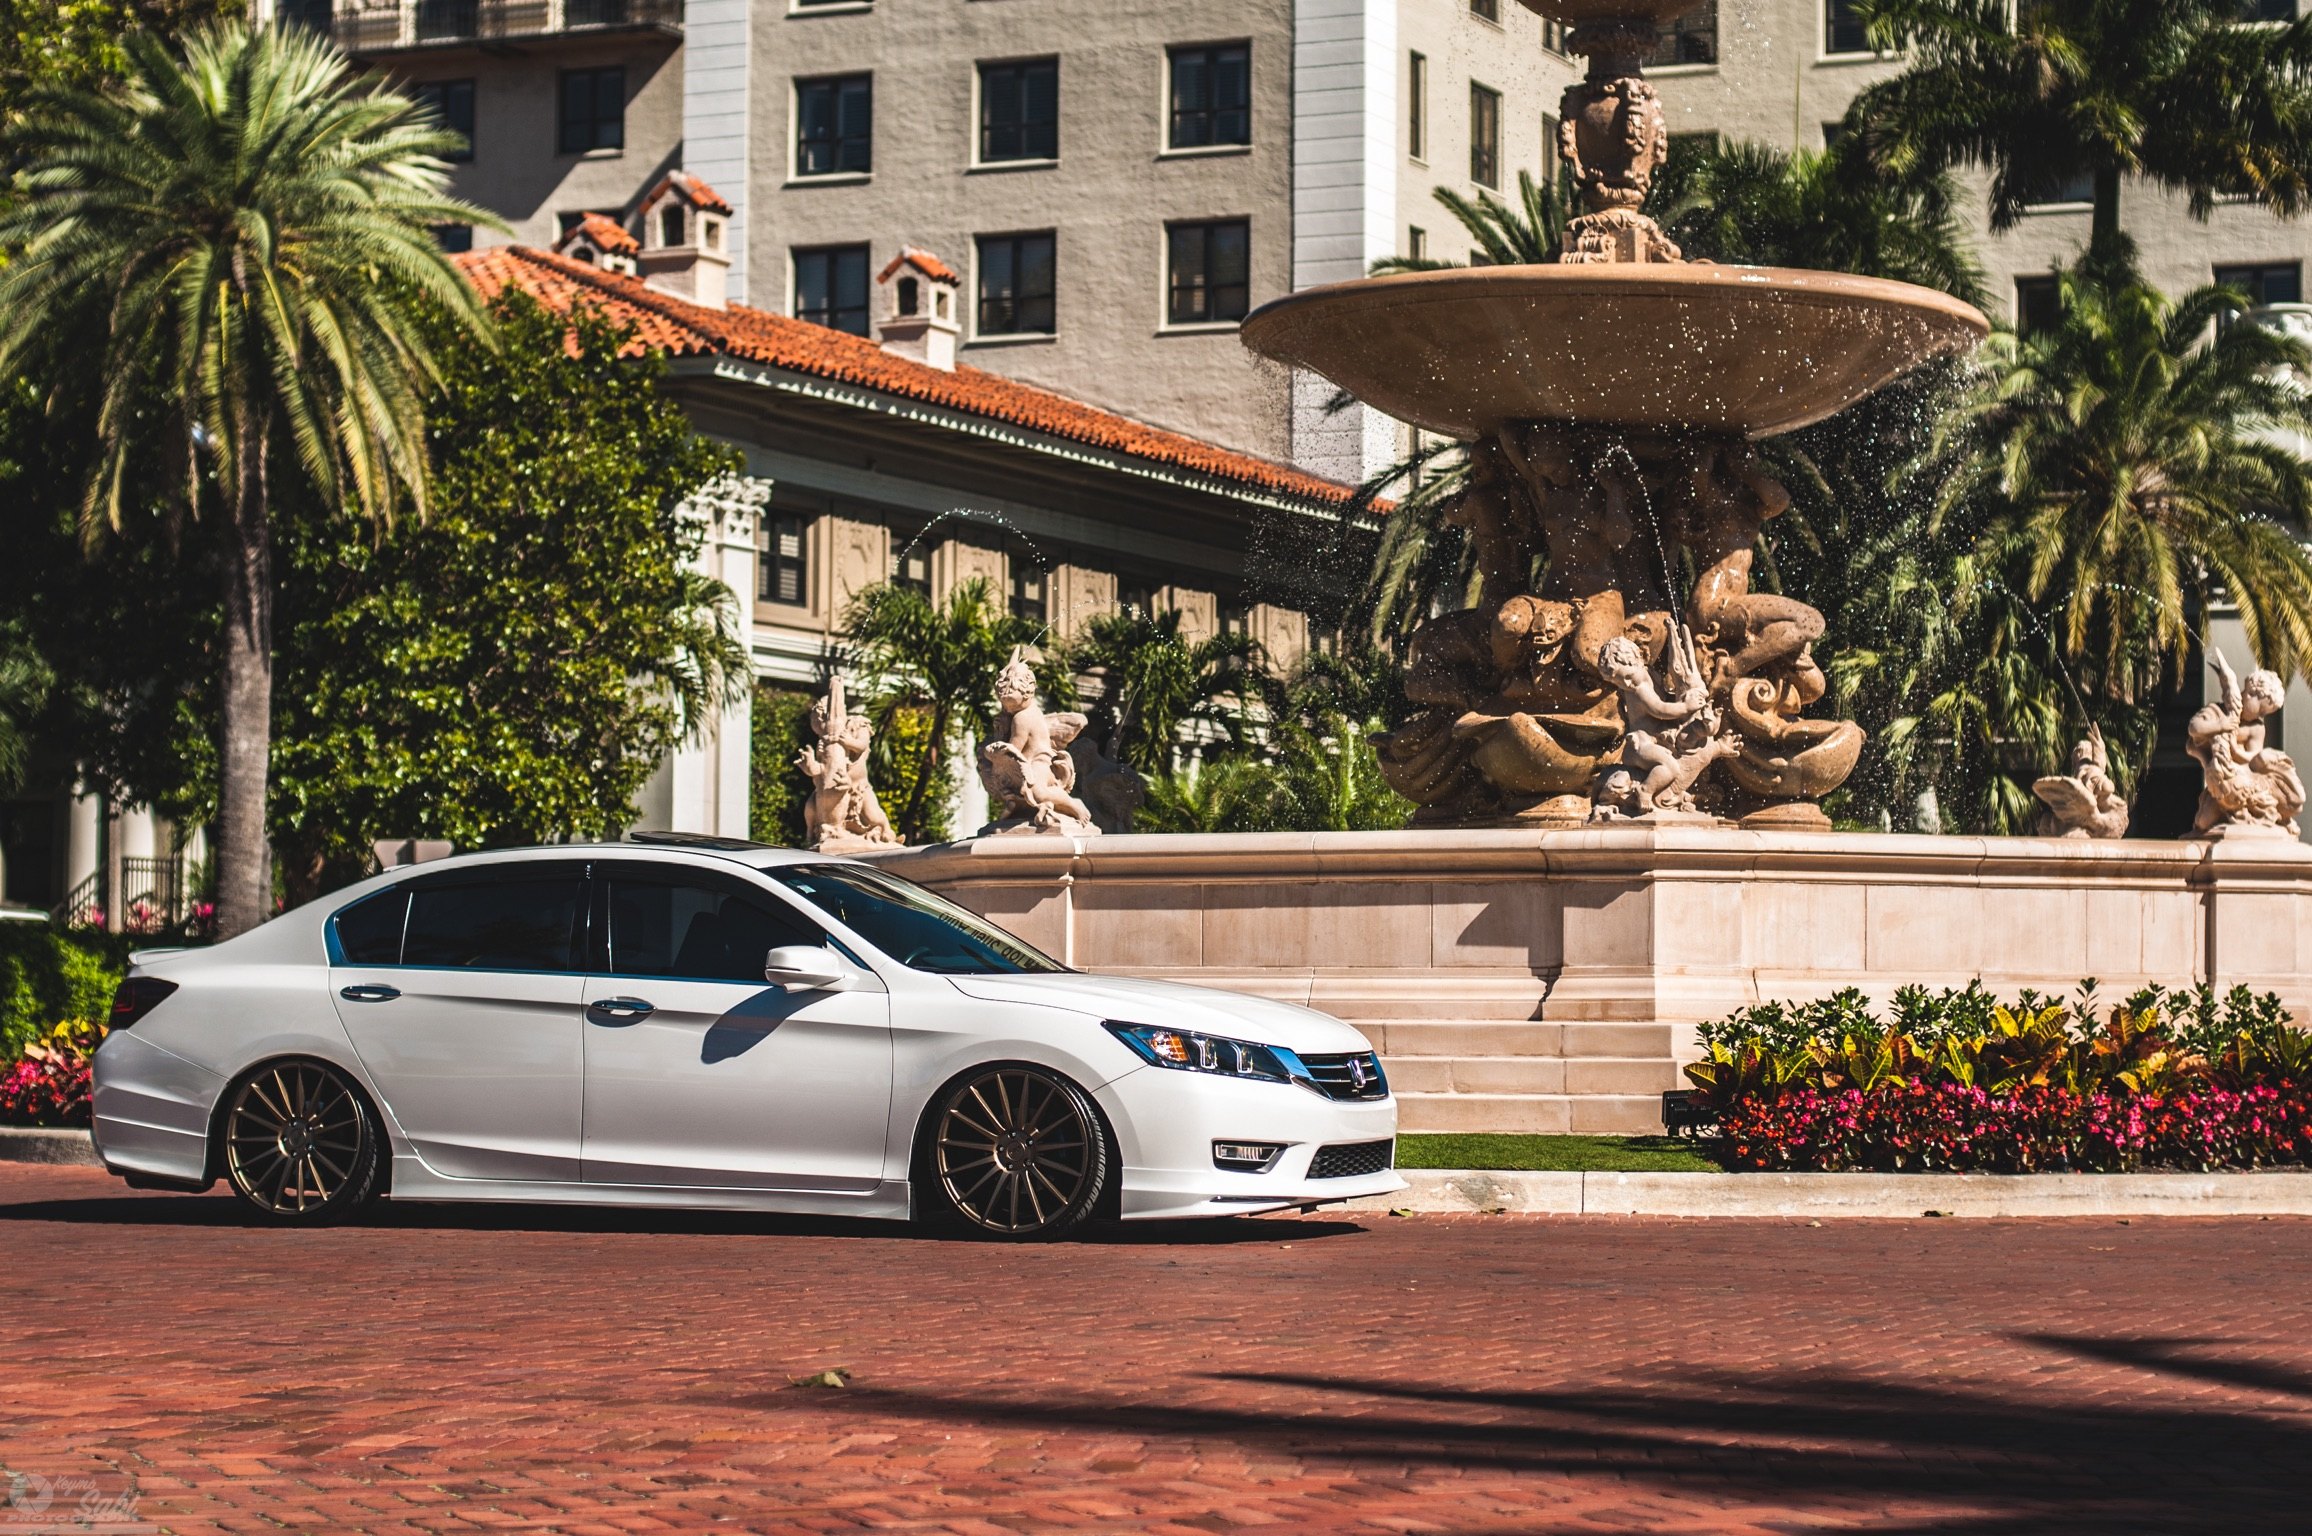 Aftermarket Side Skirts on White Honda Accord - Photo by Niche